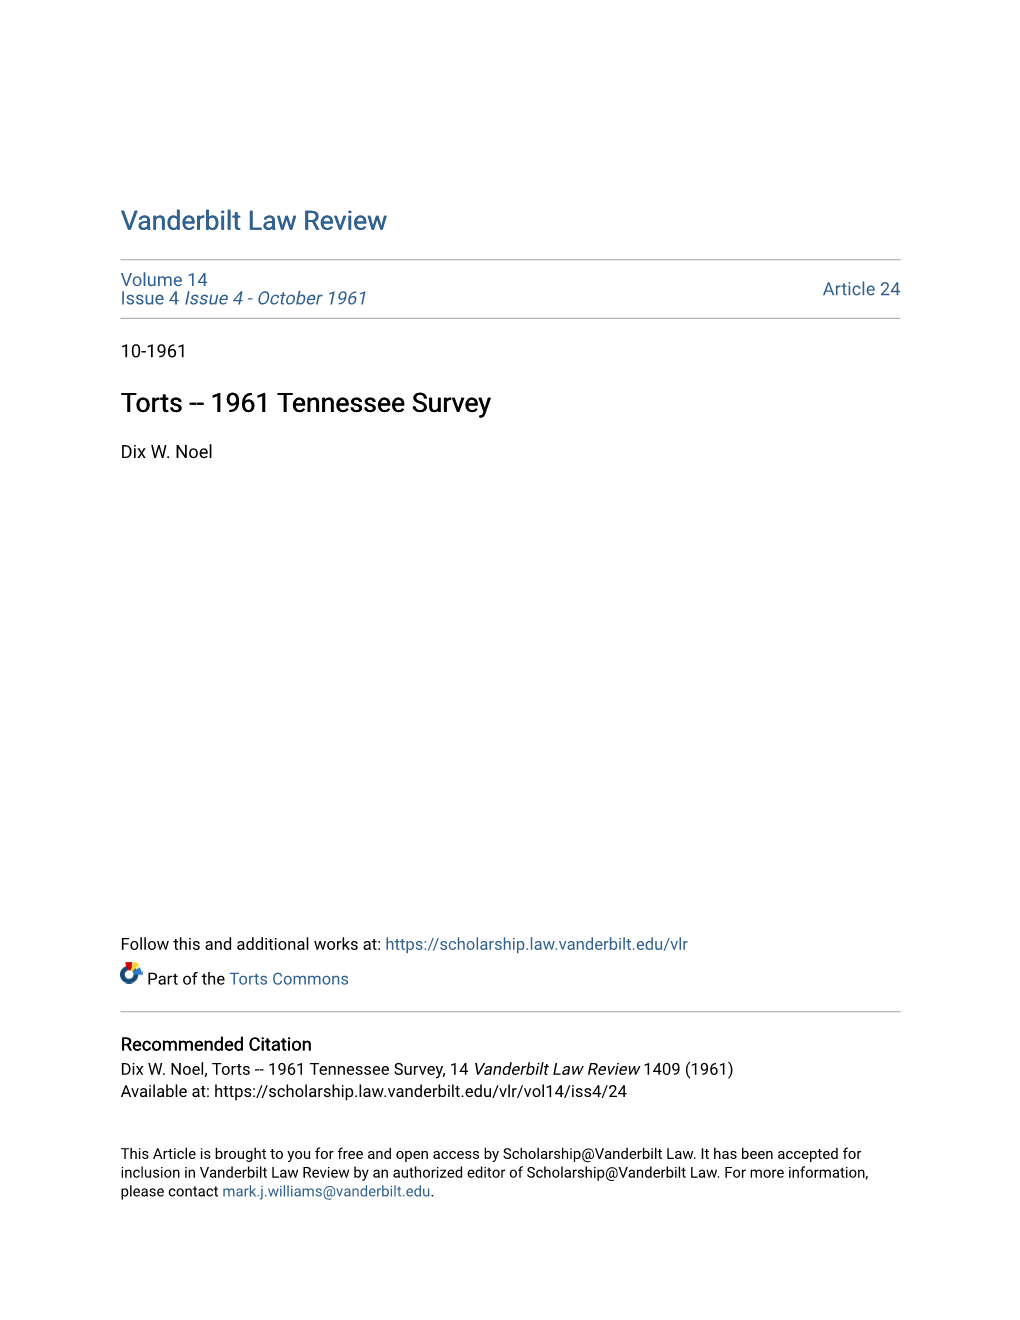 Torts -- 1961 Tennessee Survey